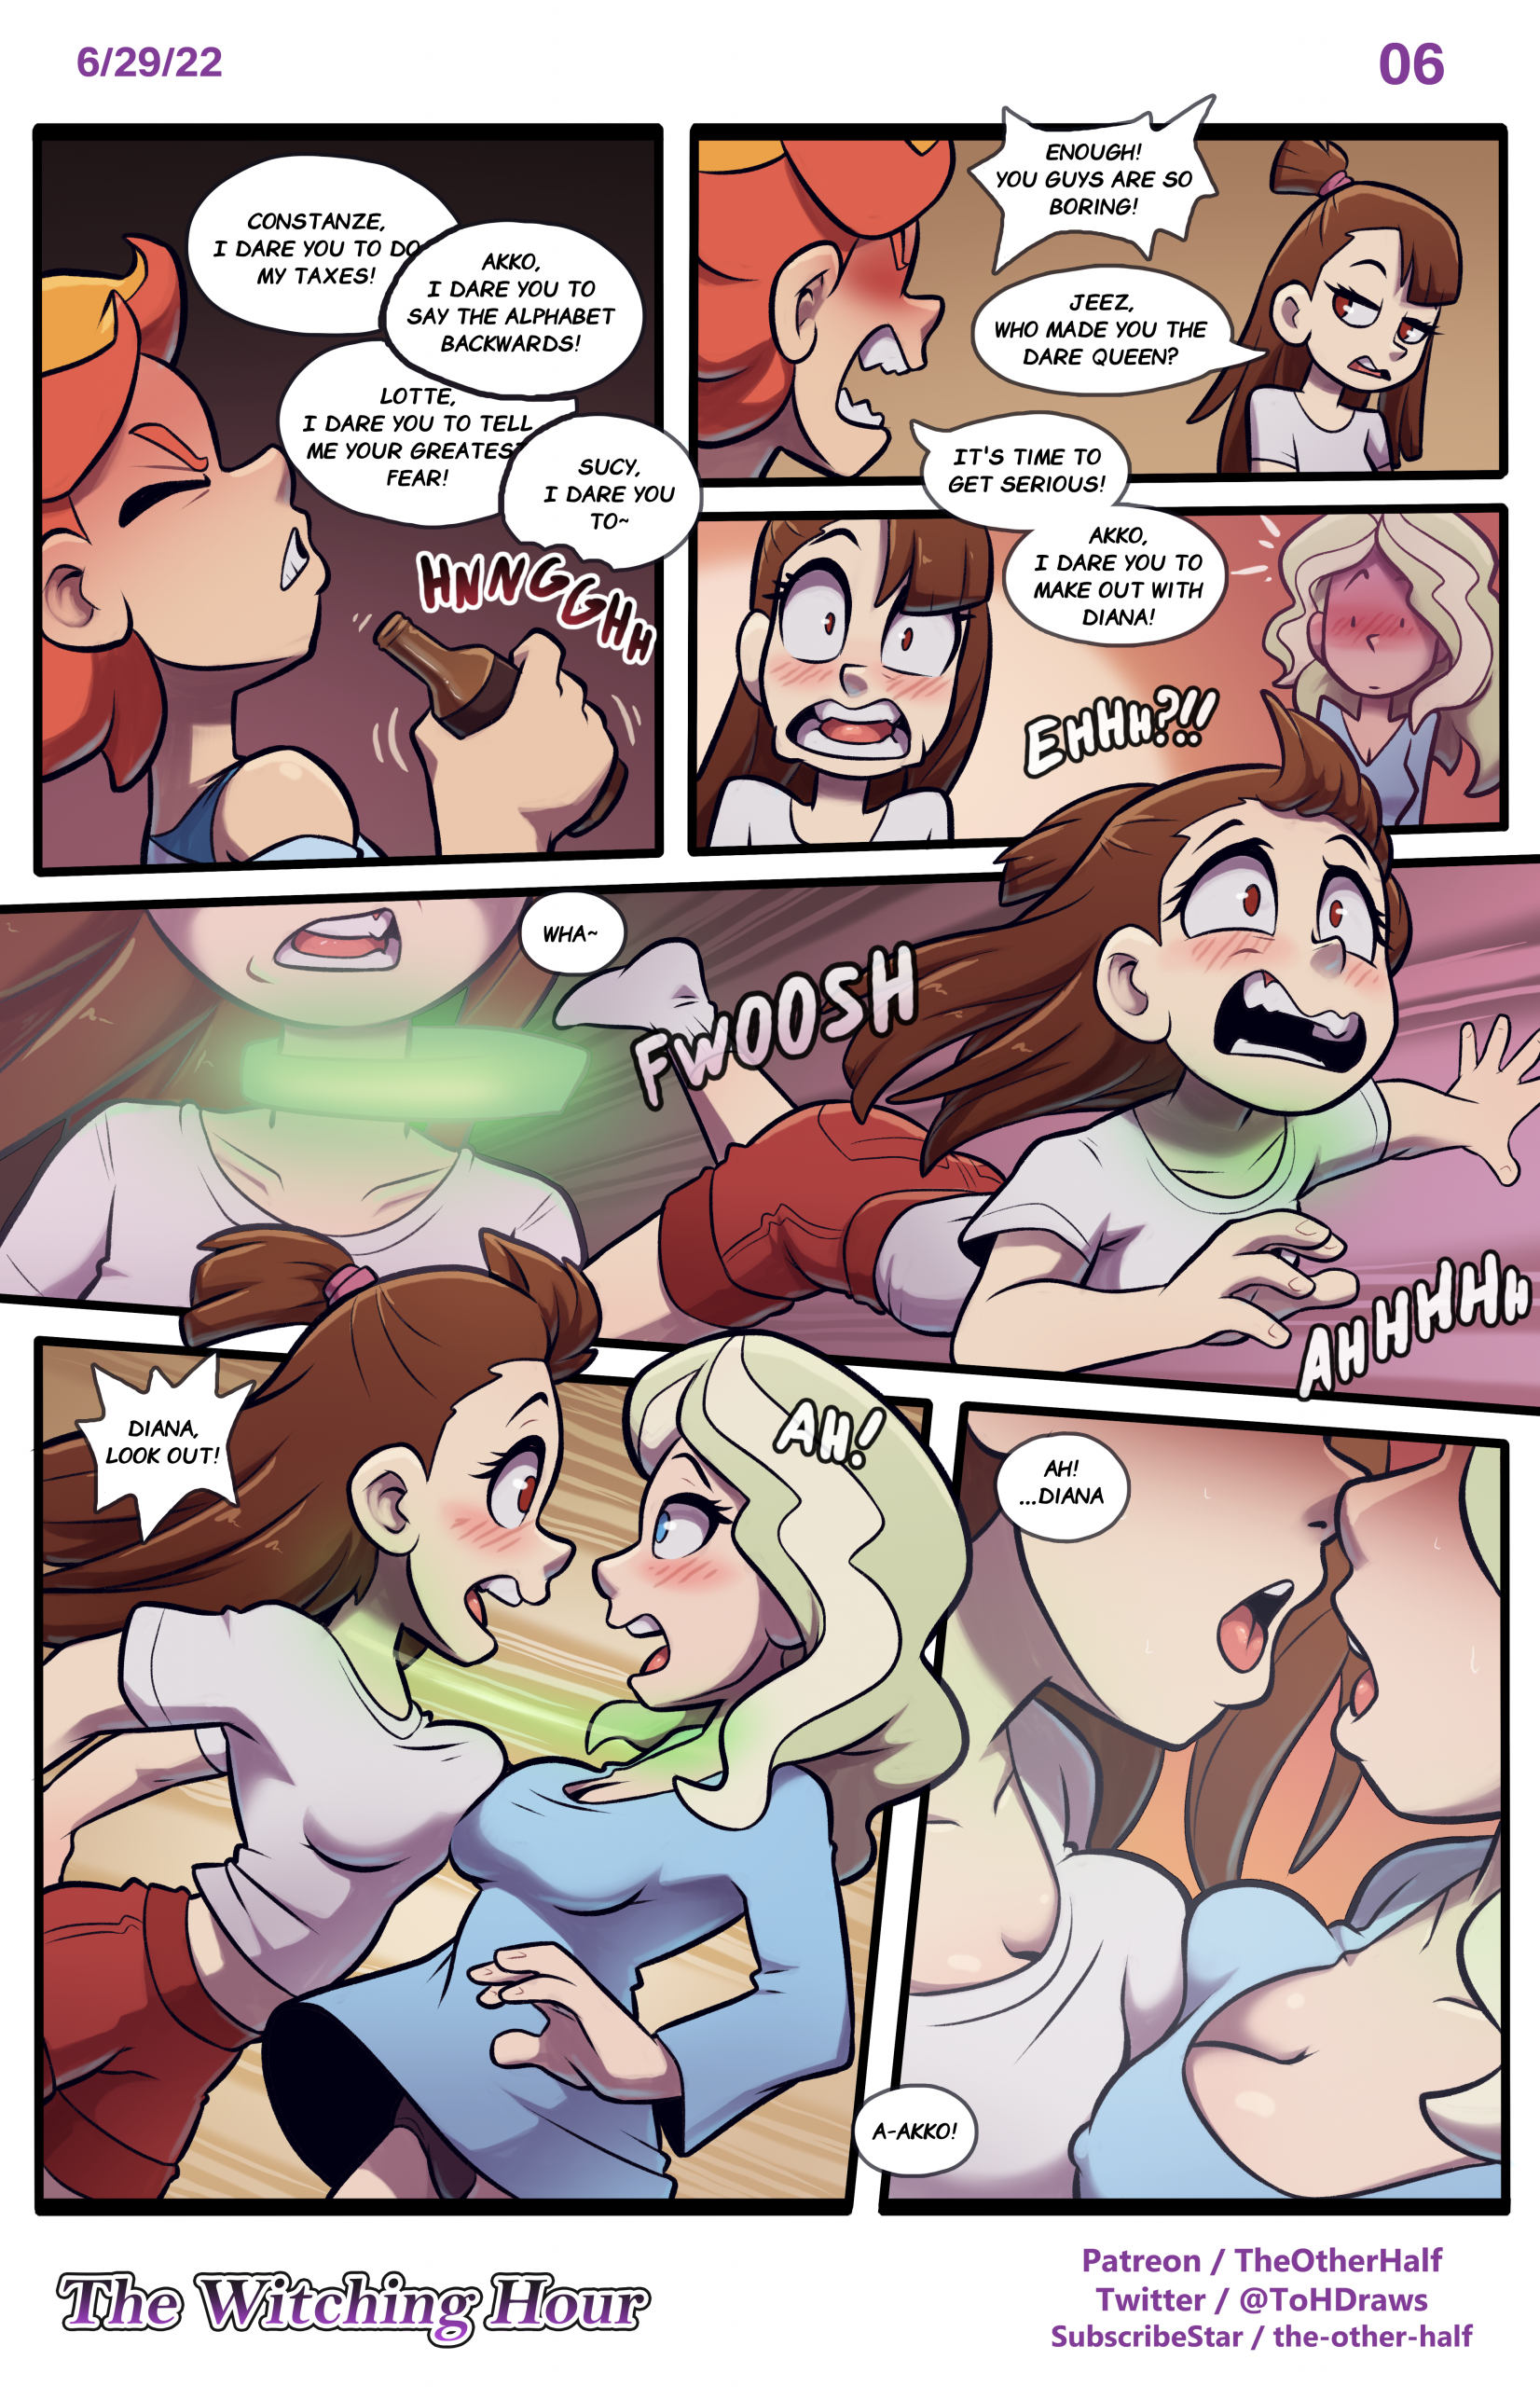 The Witching Hour - Little Witch Academia porn comic picture 6